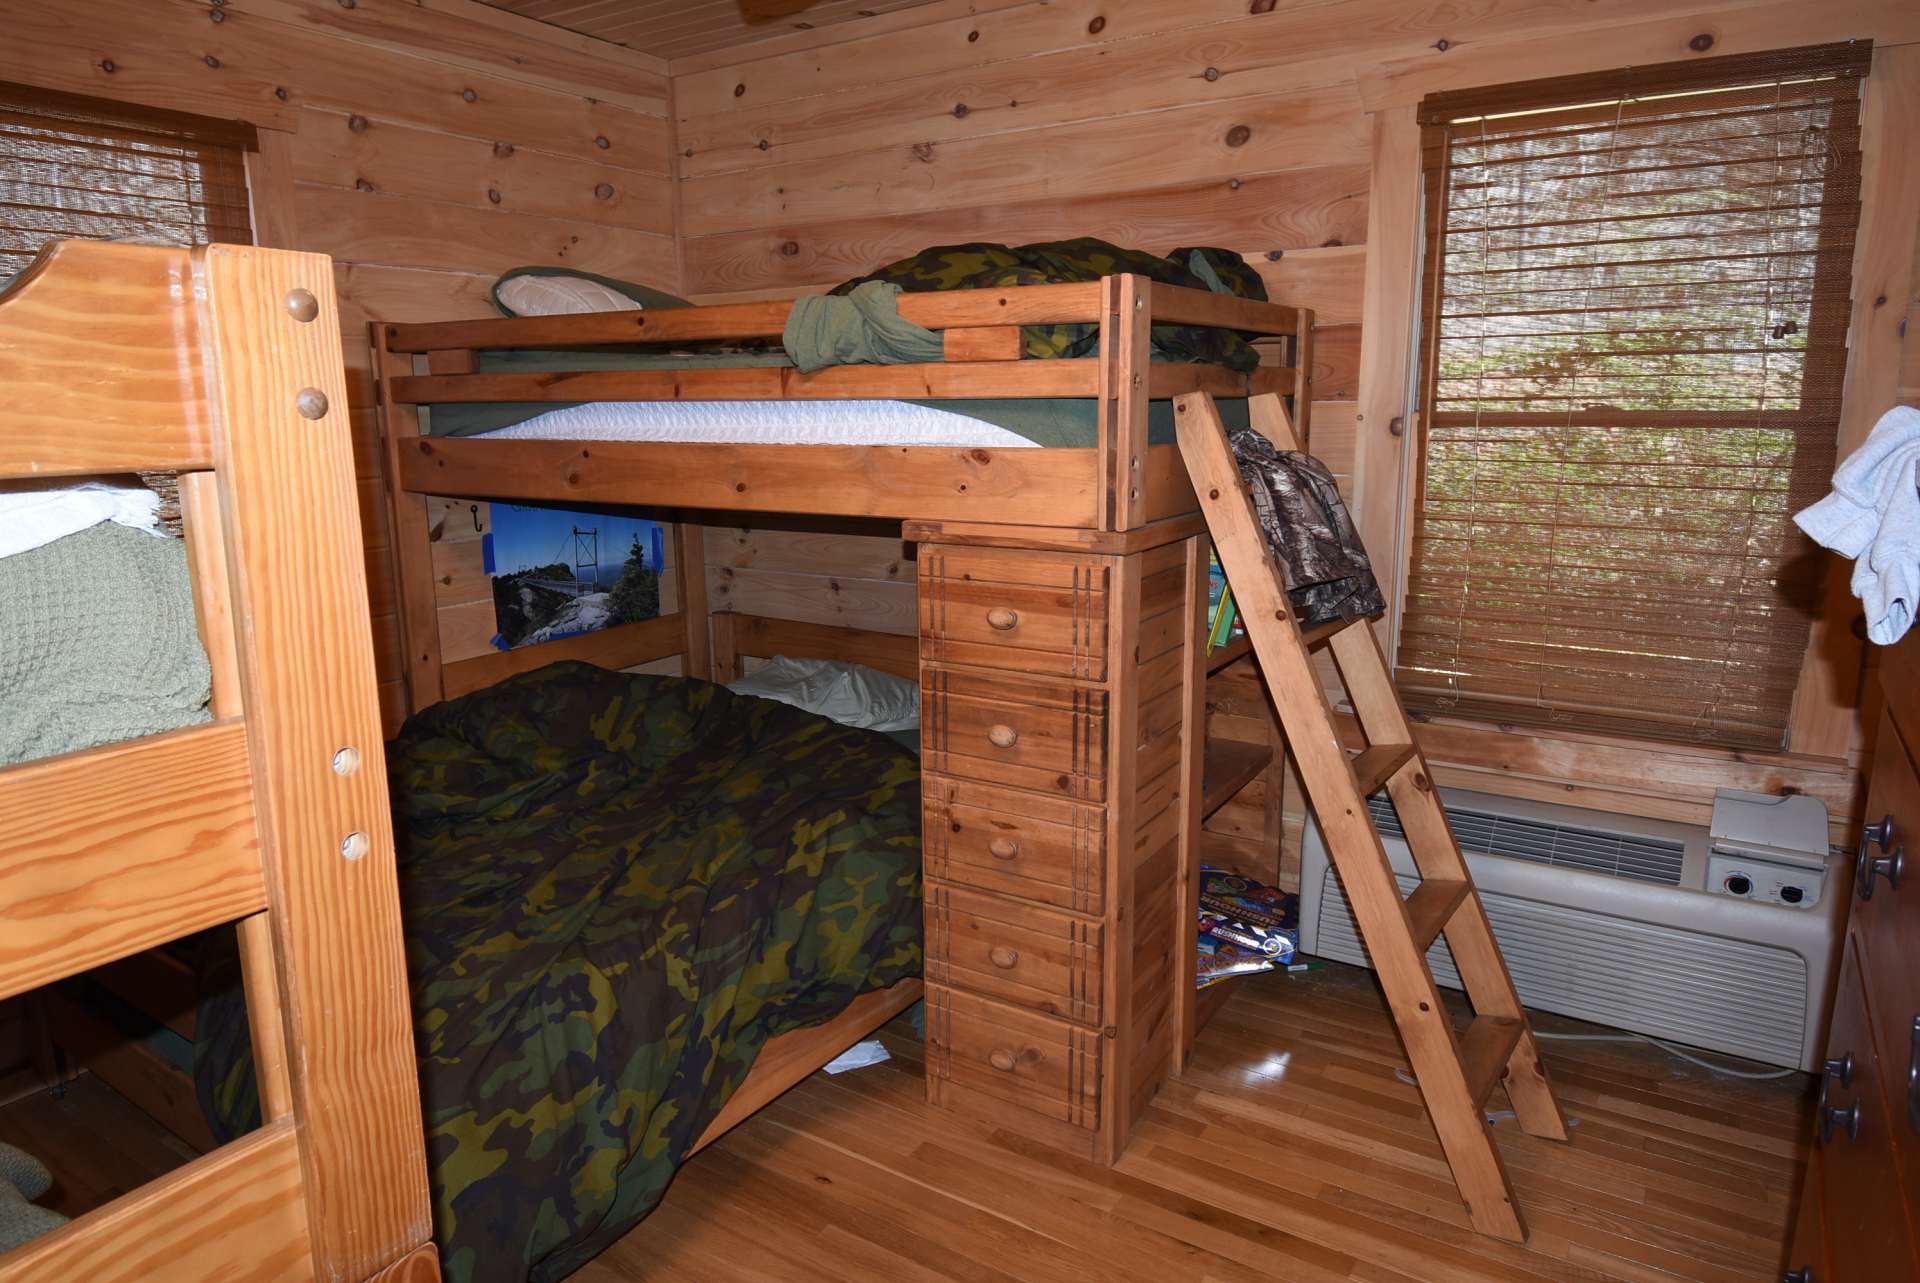 Another bedroom is amply sized with space for 2 sets of bunk beds.